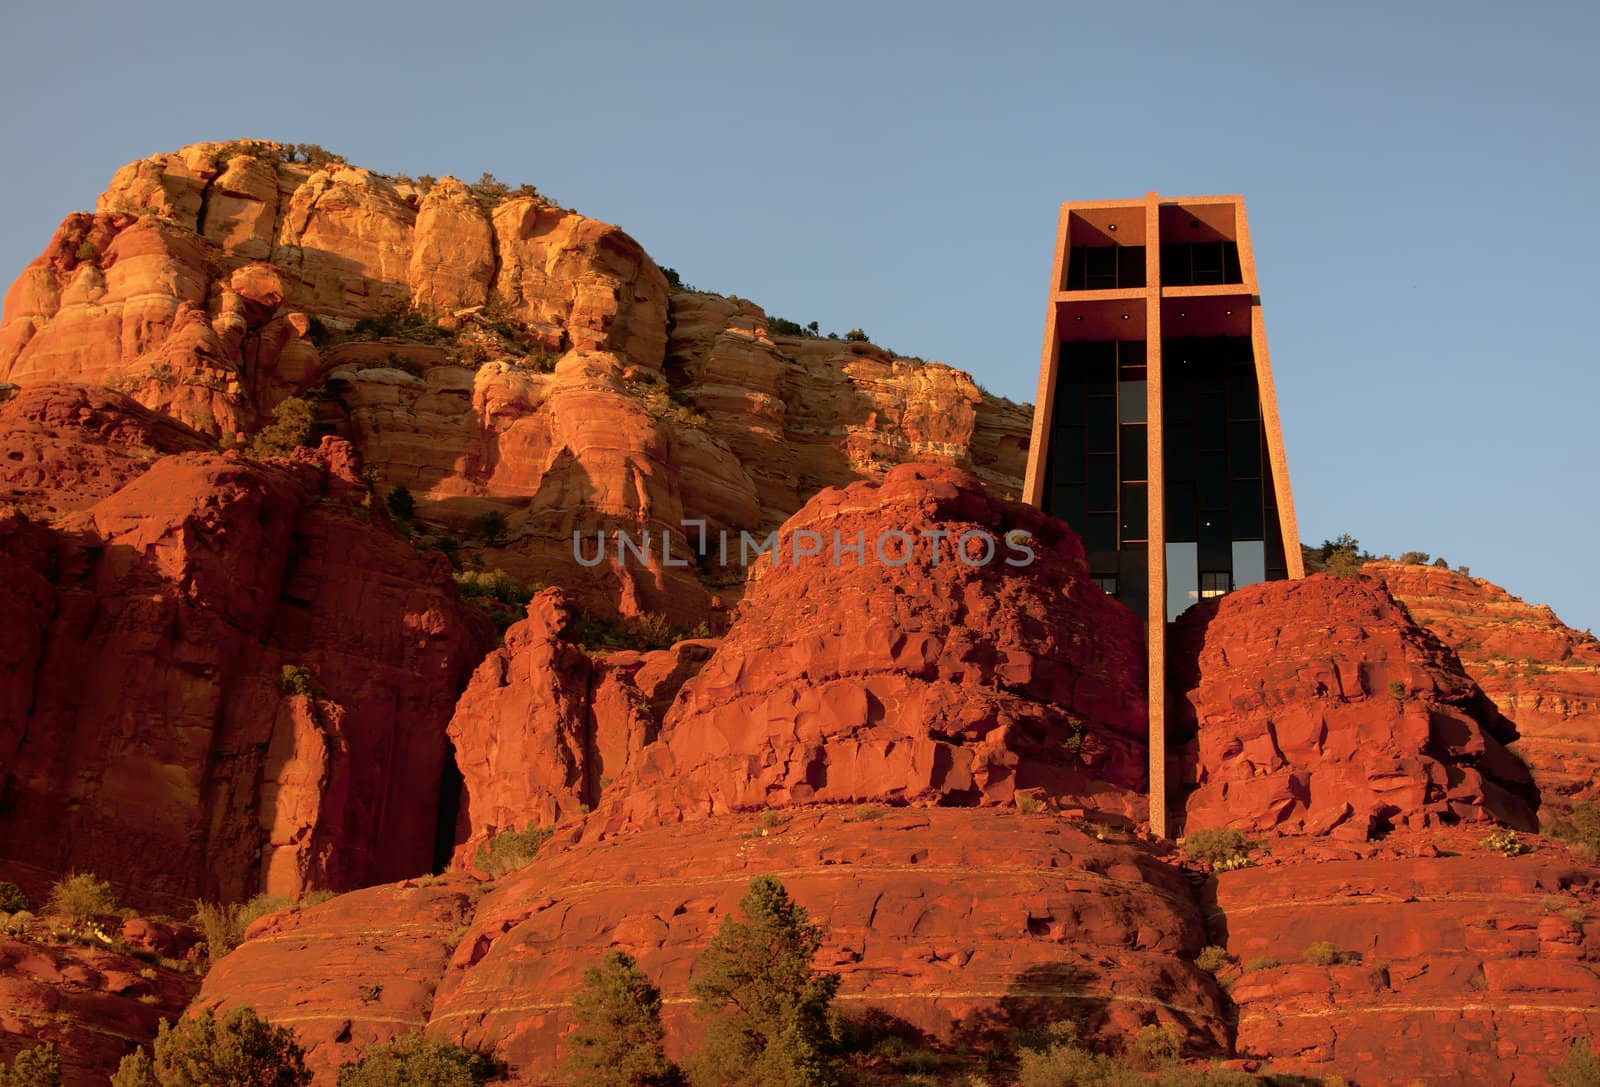 Sunset colors the red rocks even redder around the iconic Christ by Claudine